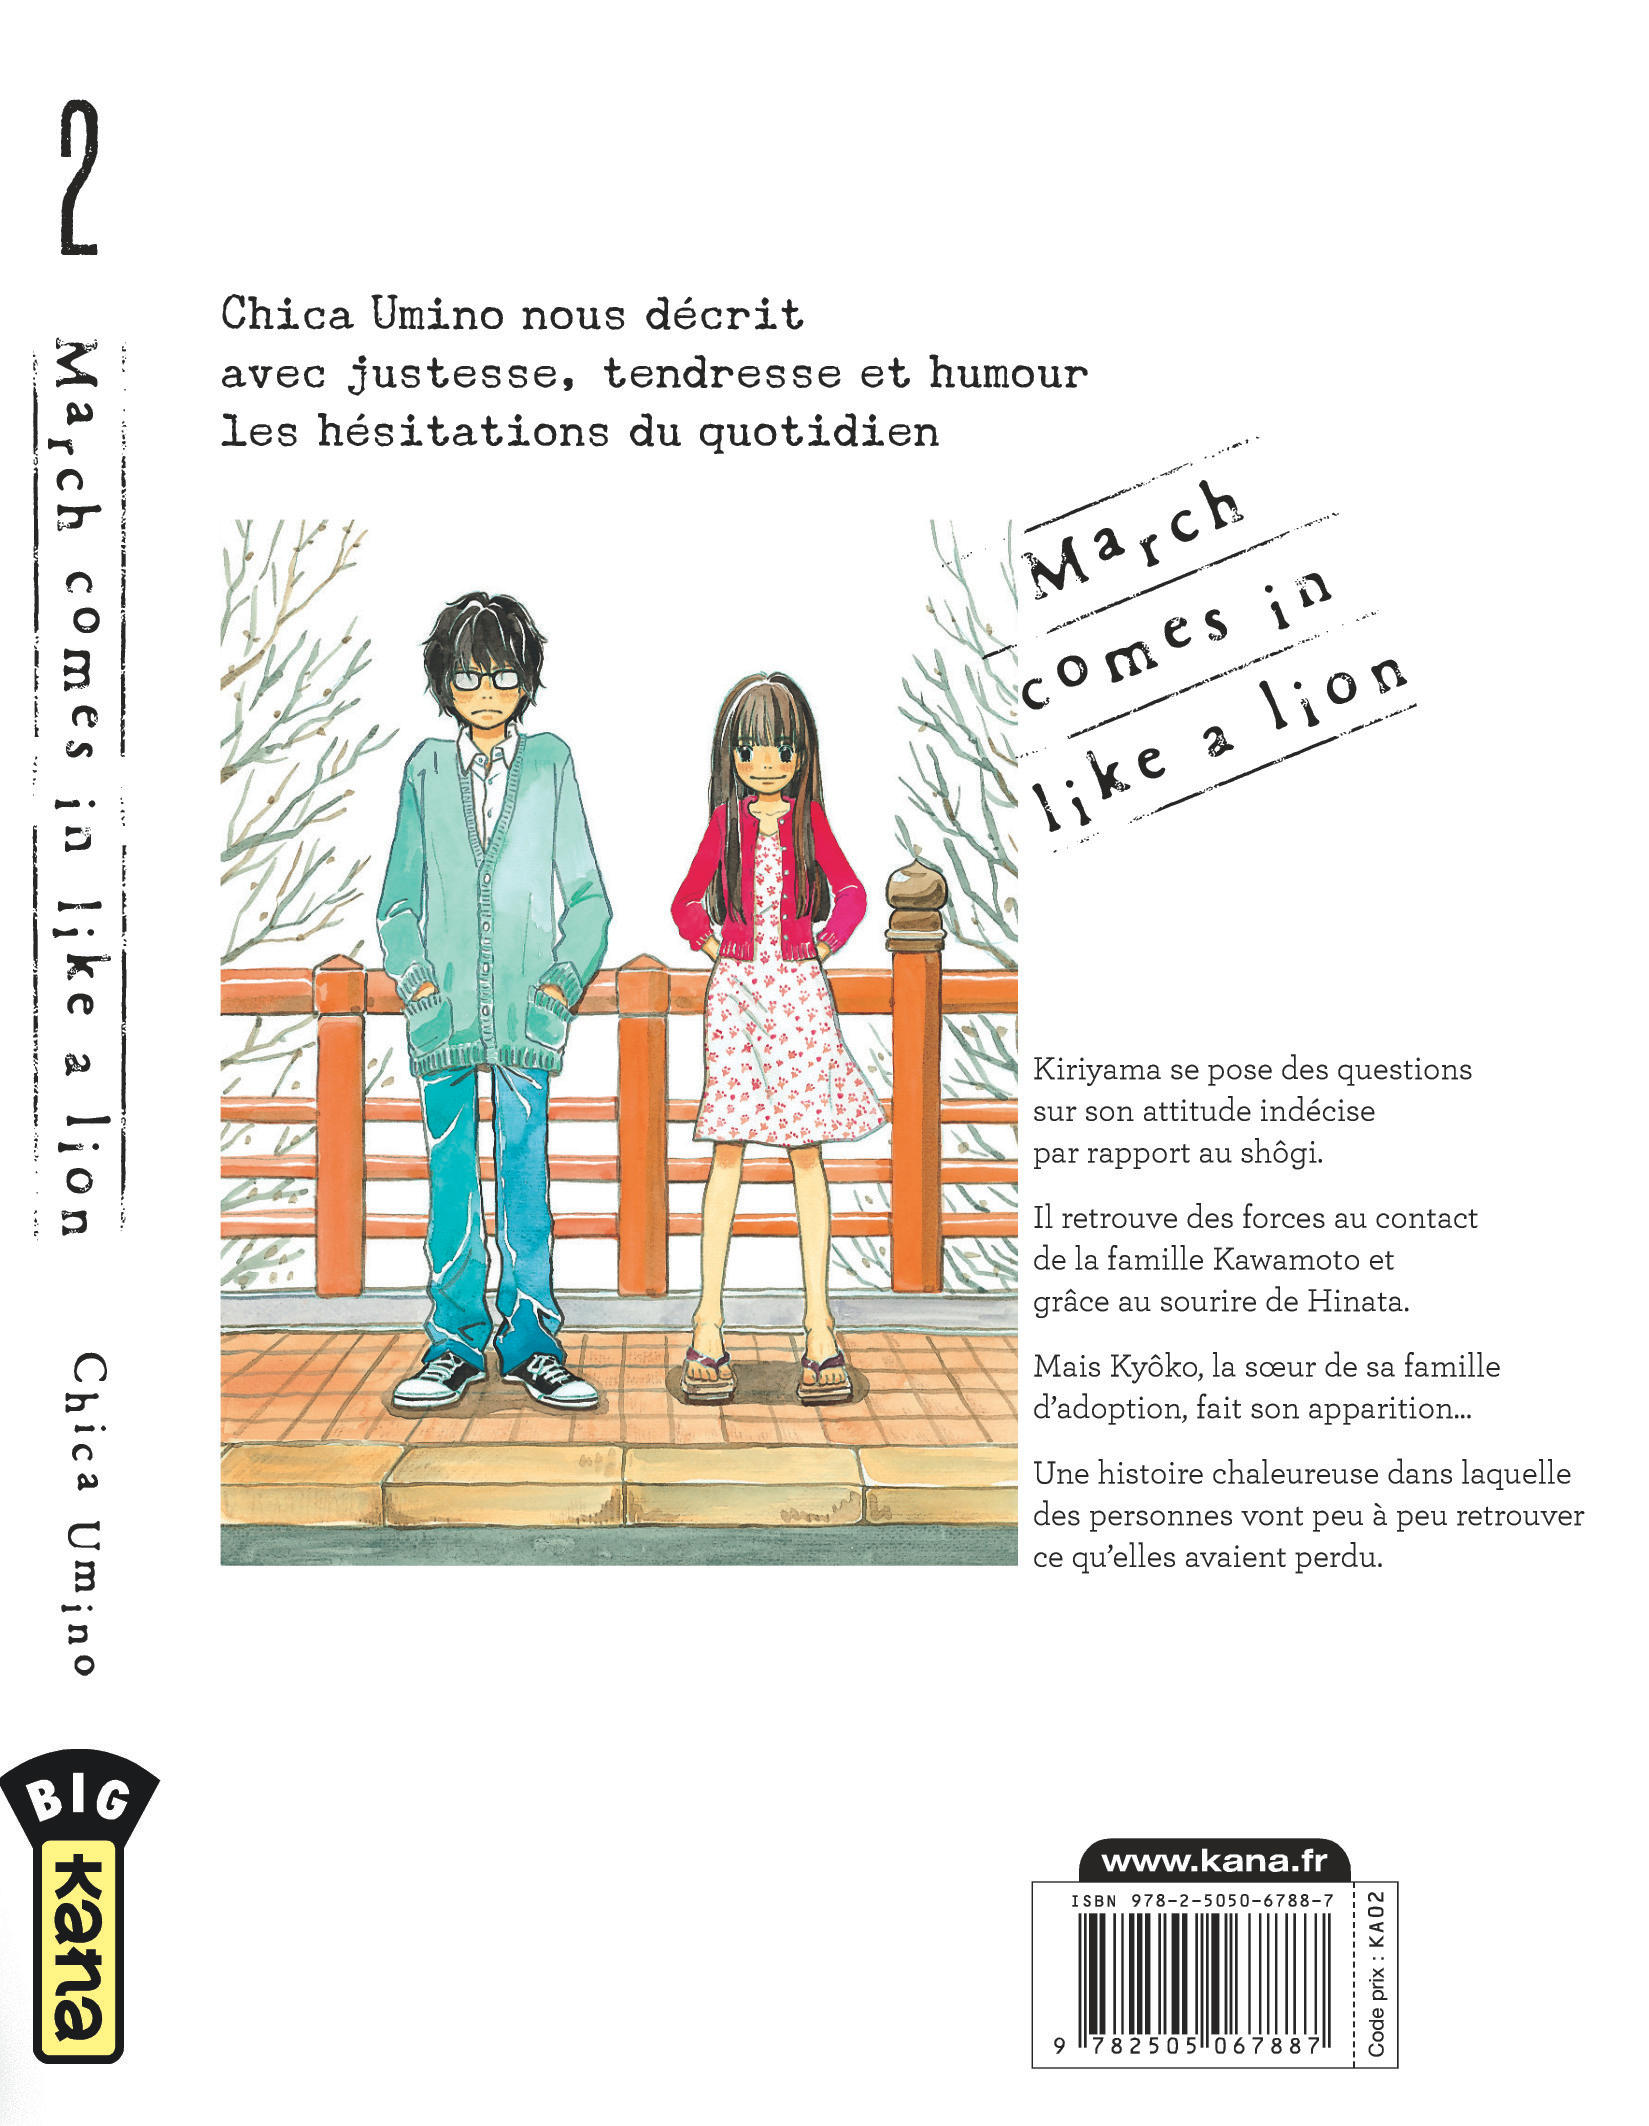 March comes in like a lion – Tome 2 - 4eme